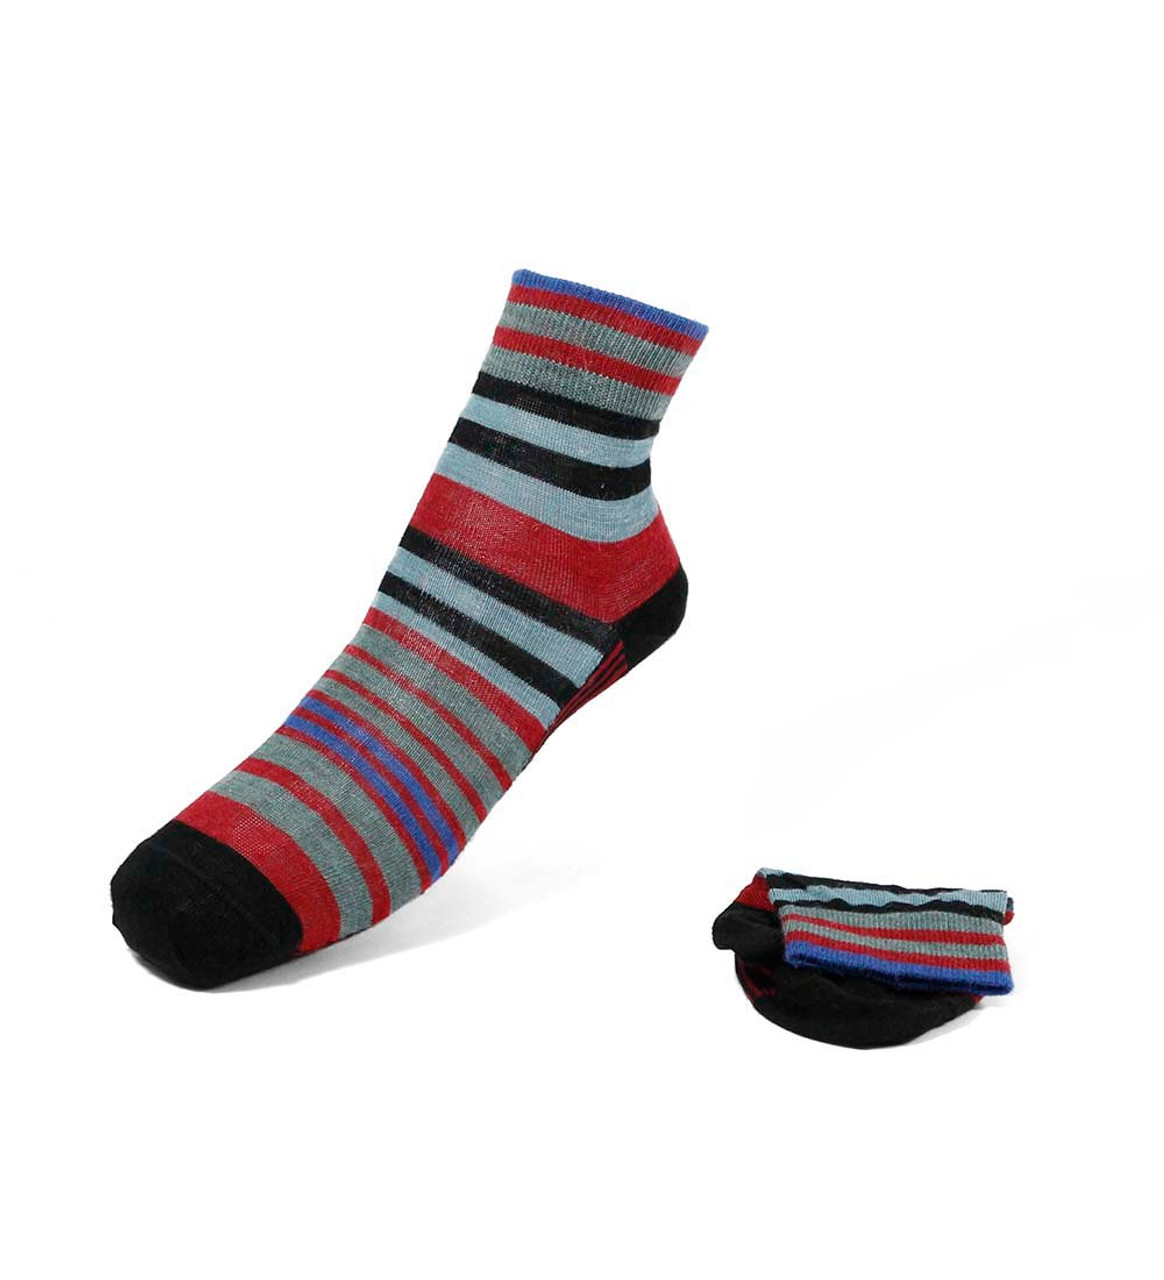 Baby Alpaca Wool Knitted Short Socks Soft And Warm One Size Multicolor  Design For Men Peru - Alpaca Warehouse